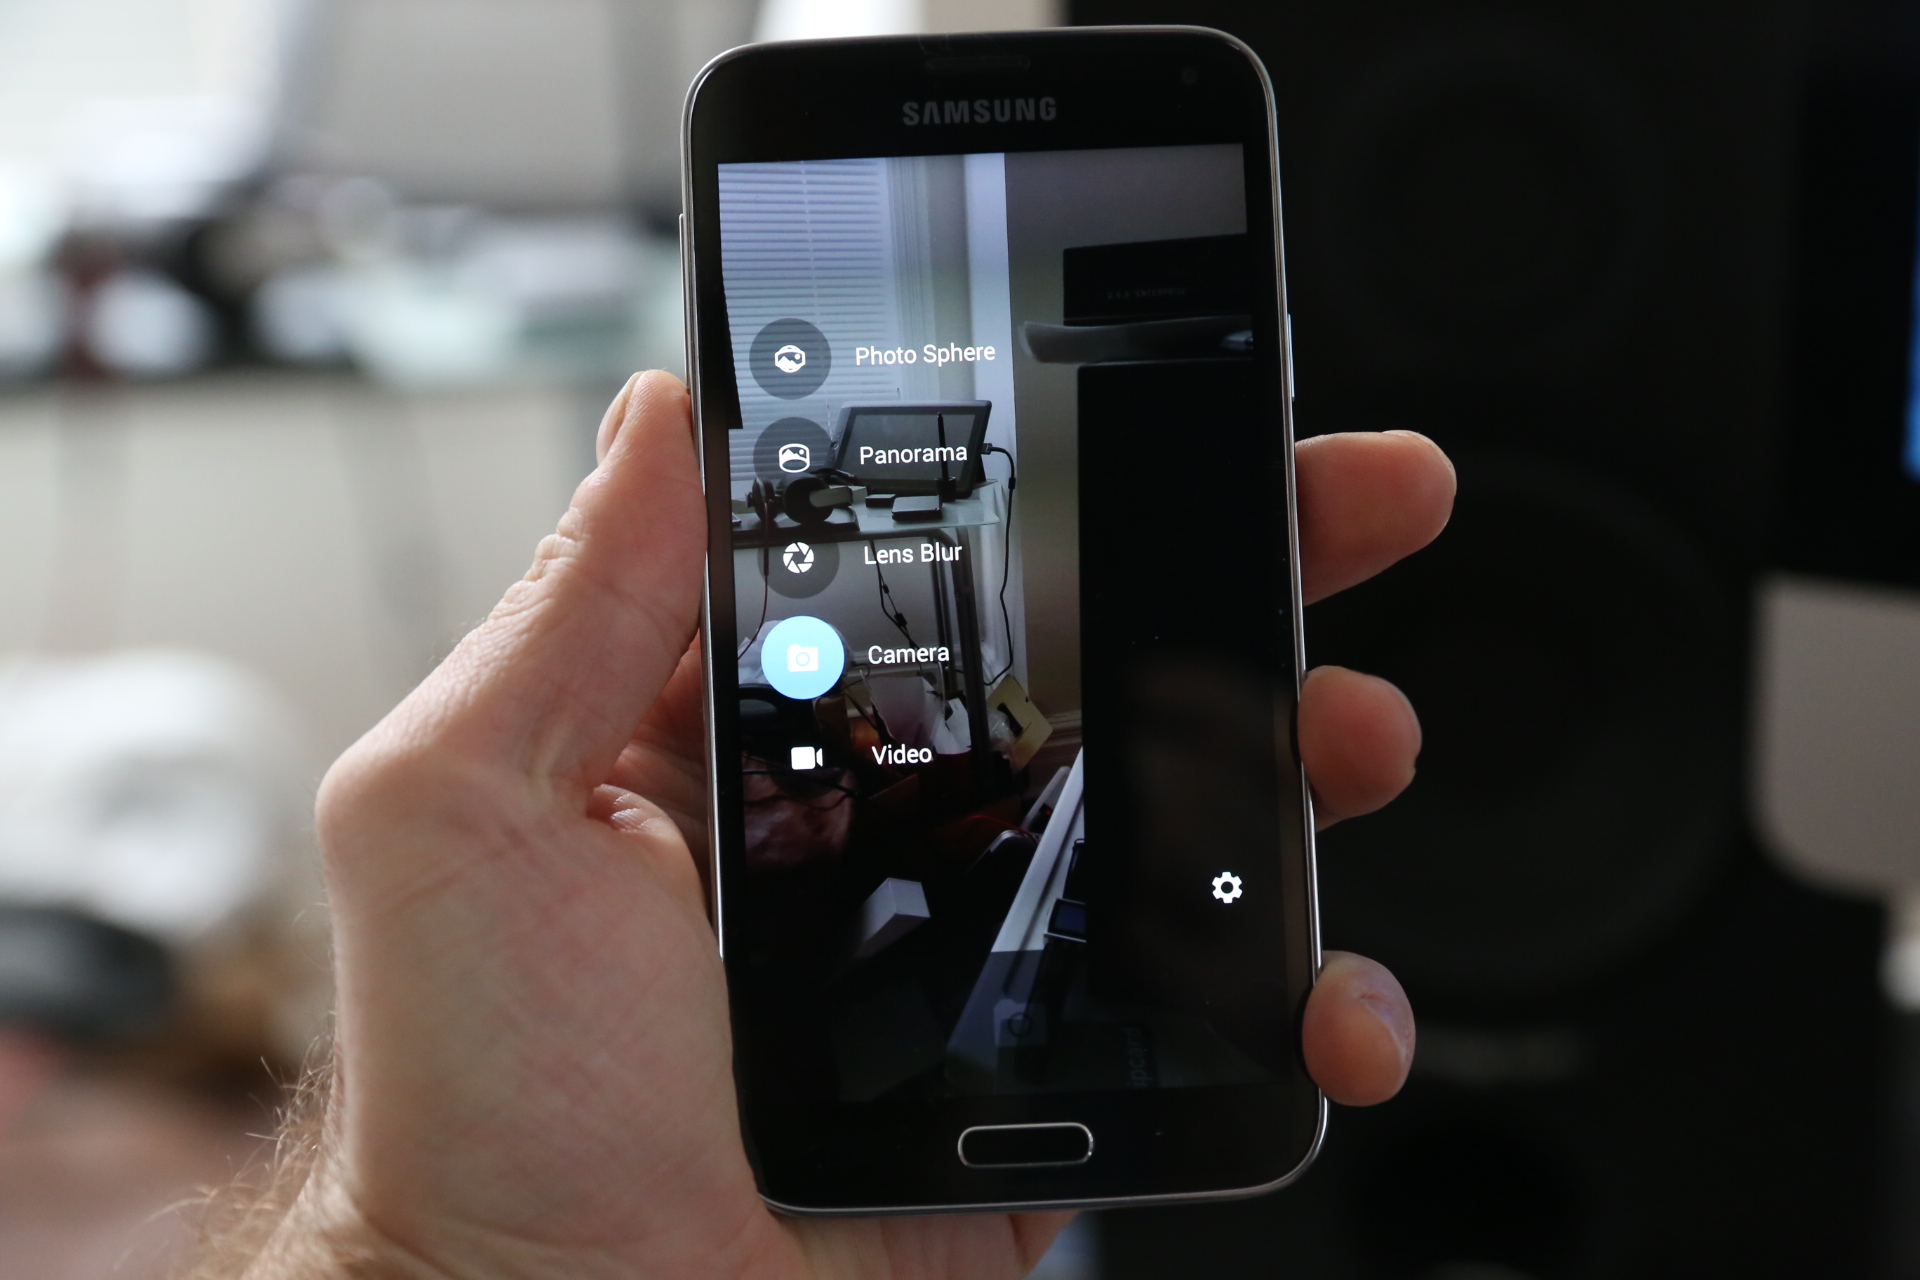 Google Camera App Brings Lens Blur Background Defocus To Any KitKat Android  Devices | TechCrunch